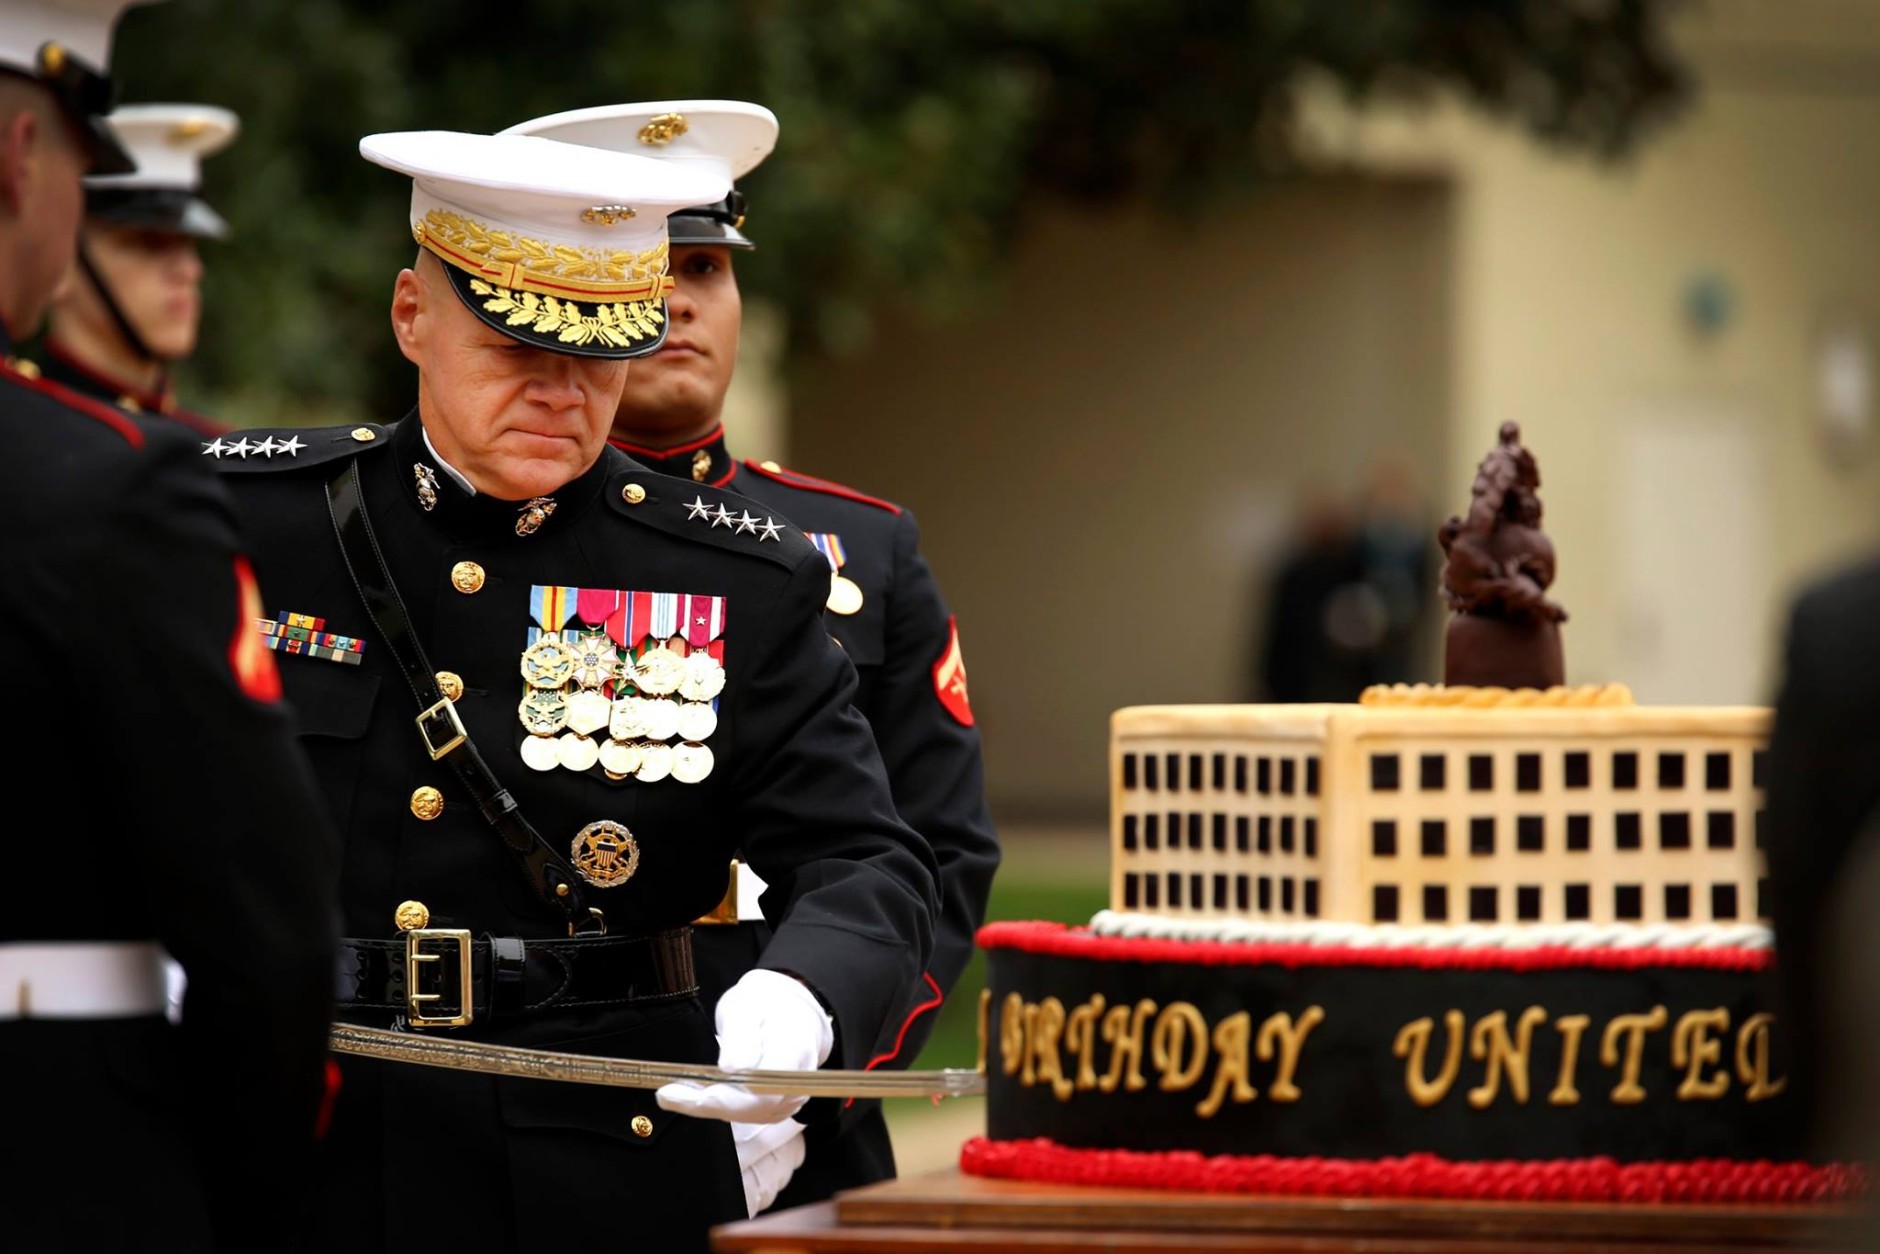 Commandant of the Marine Corps Gen. Robert B. Neller cuts the cake Nov. 9 at the Pentagon during the cake cutting ceremony for the Marine Corps’ 240th birthday. Marines worldwide cut a cake in celebration of the birth of the Marine Corps every year. (U.S. Marine Corps photo by 